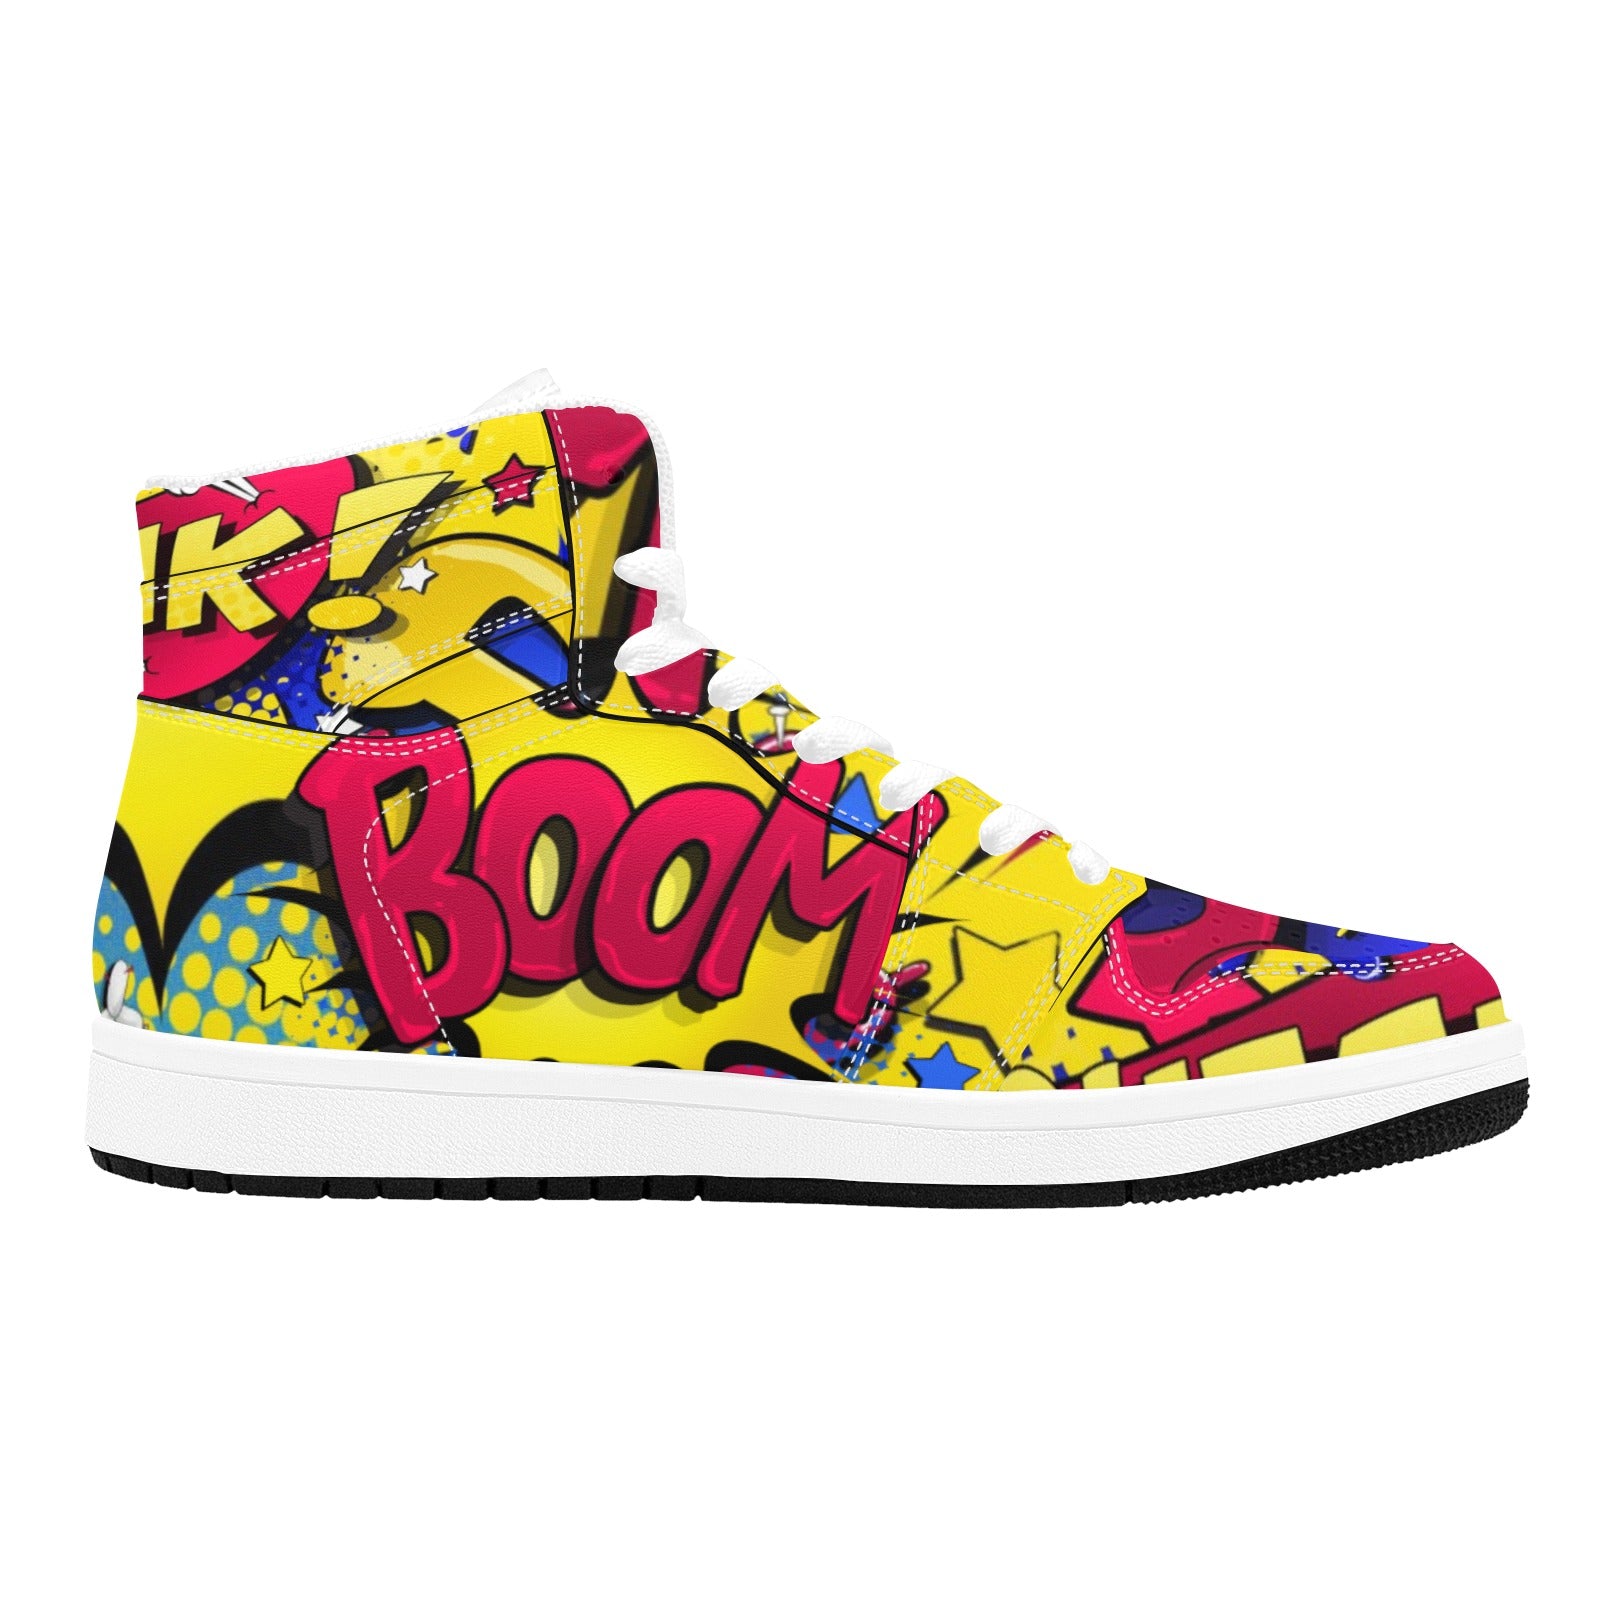 Fun high tops for balloon twisters in yellow, red and blue